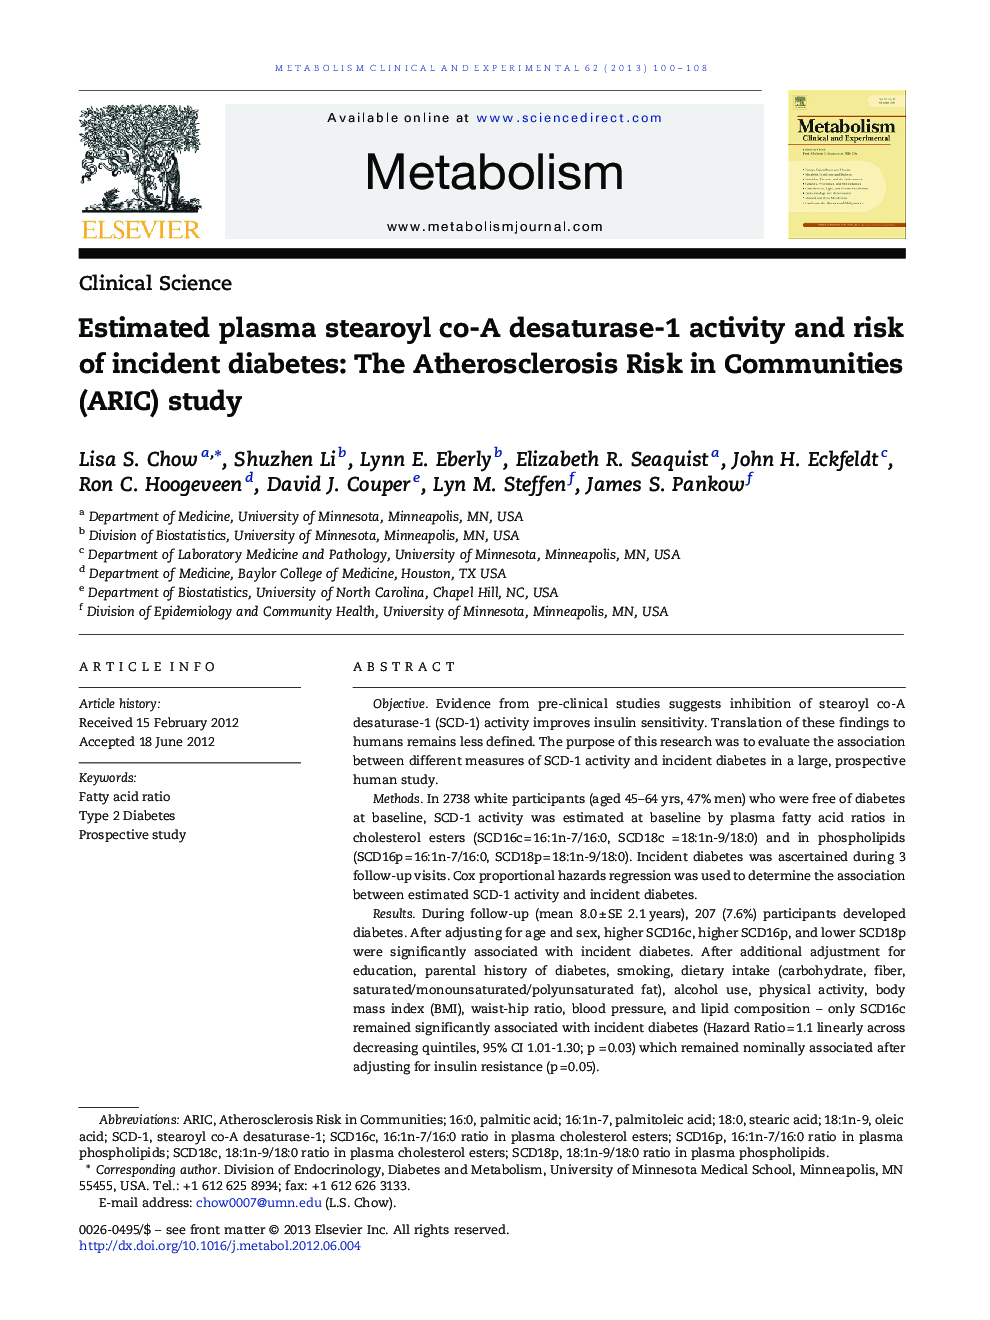 Estimated plasma stearoyl co-A desaturase-1 activity and risk of incident diabetes: The Atherosclerosis Risk in Communities (ARIC) study